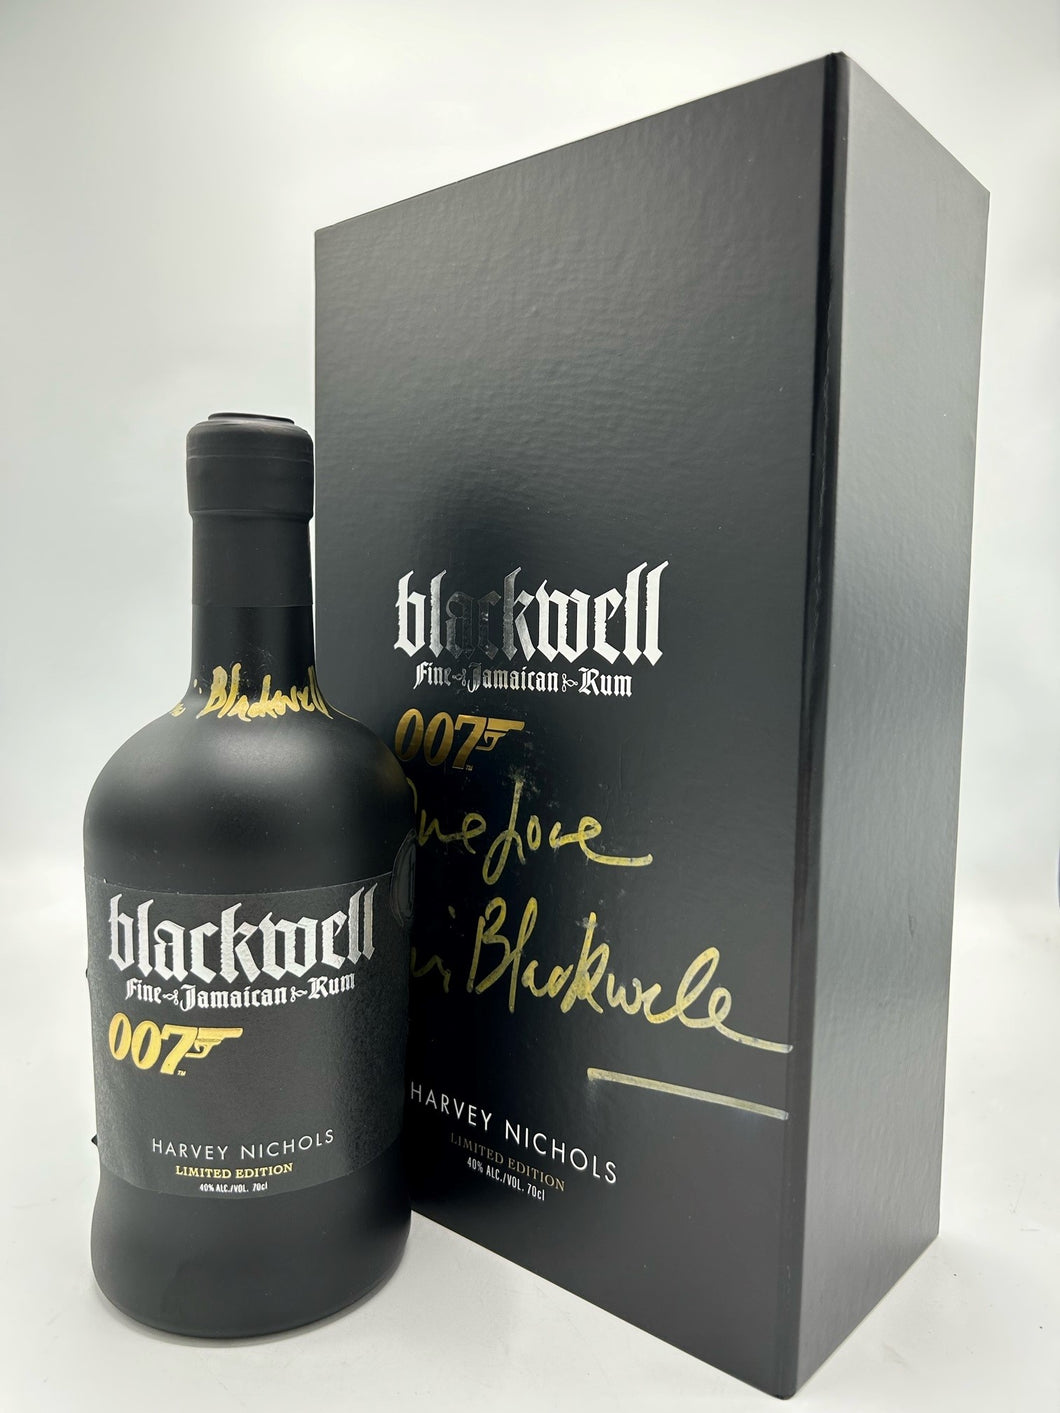 Blackwell 007 Rum Limited Edition Bottle Number 005 Signed by Chris Blackwell